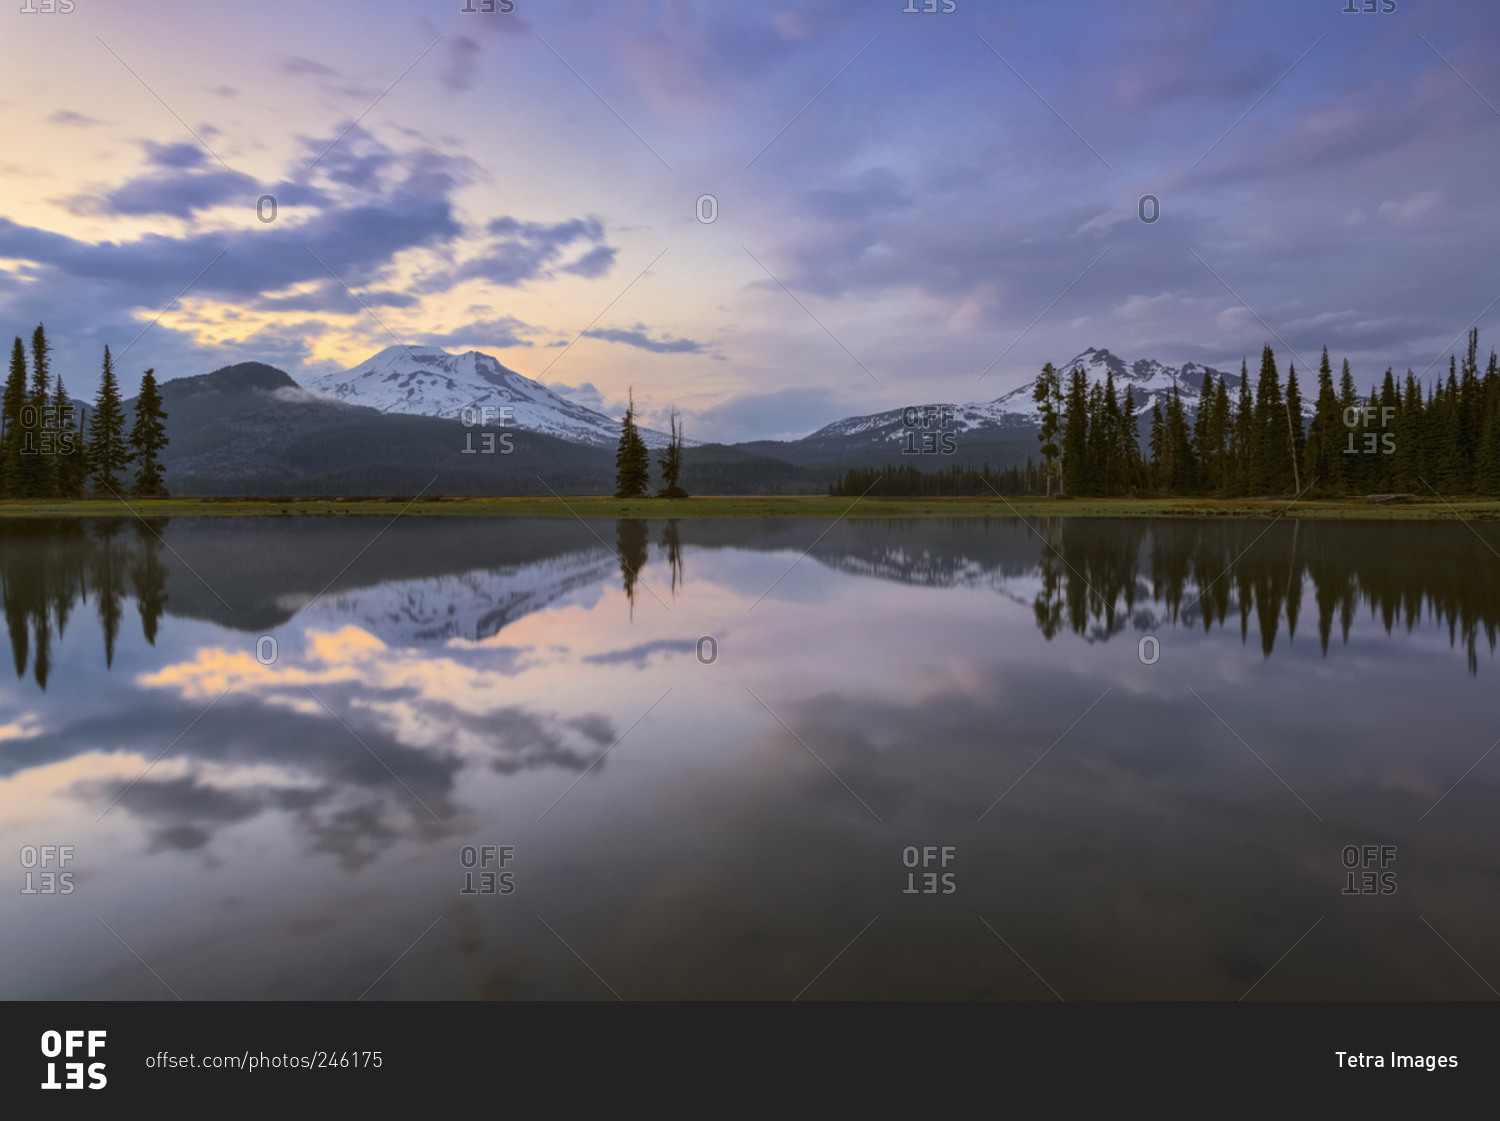 View of Sparks Lake at sunset, Oregon